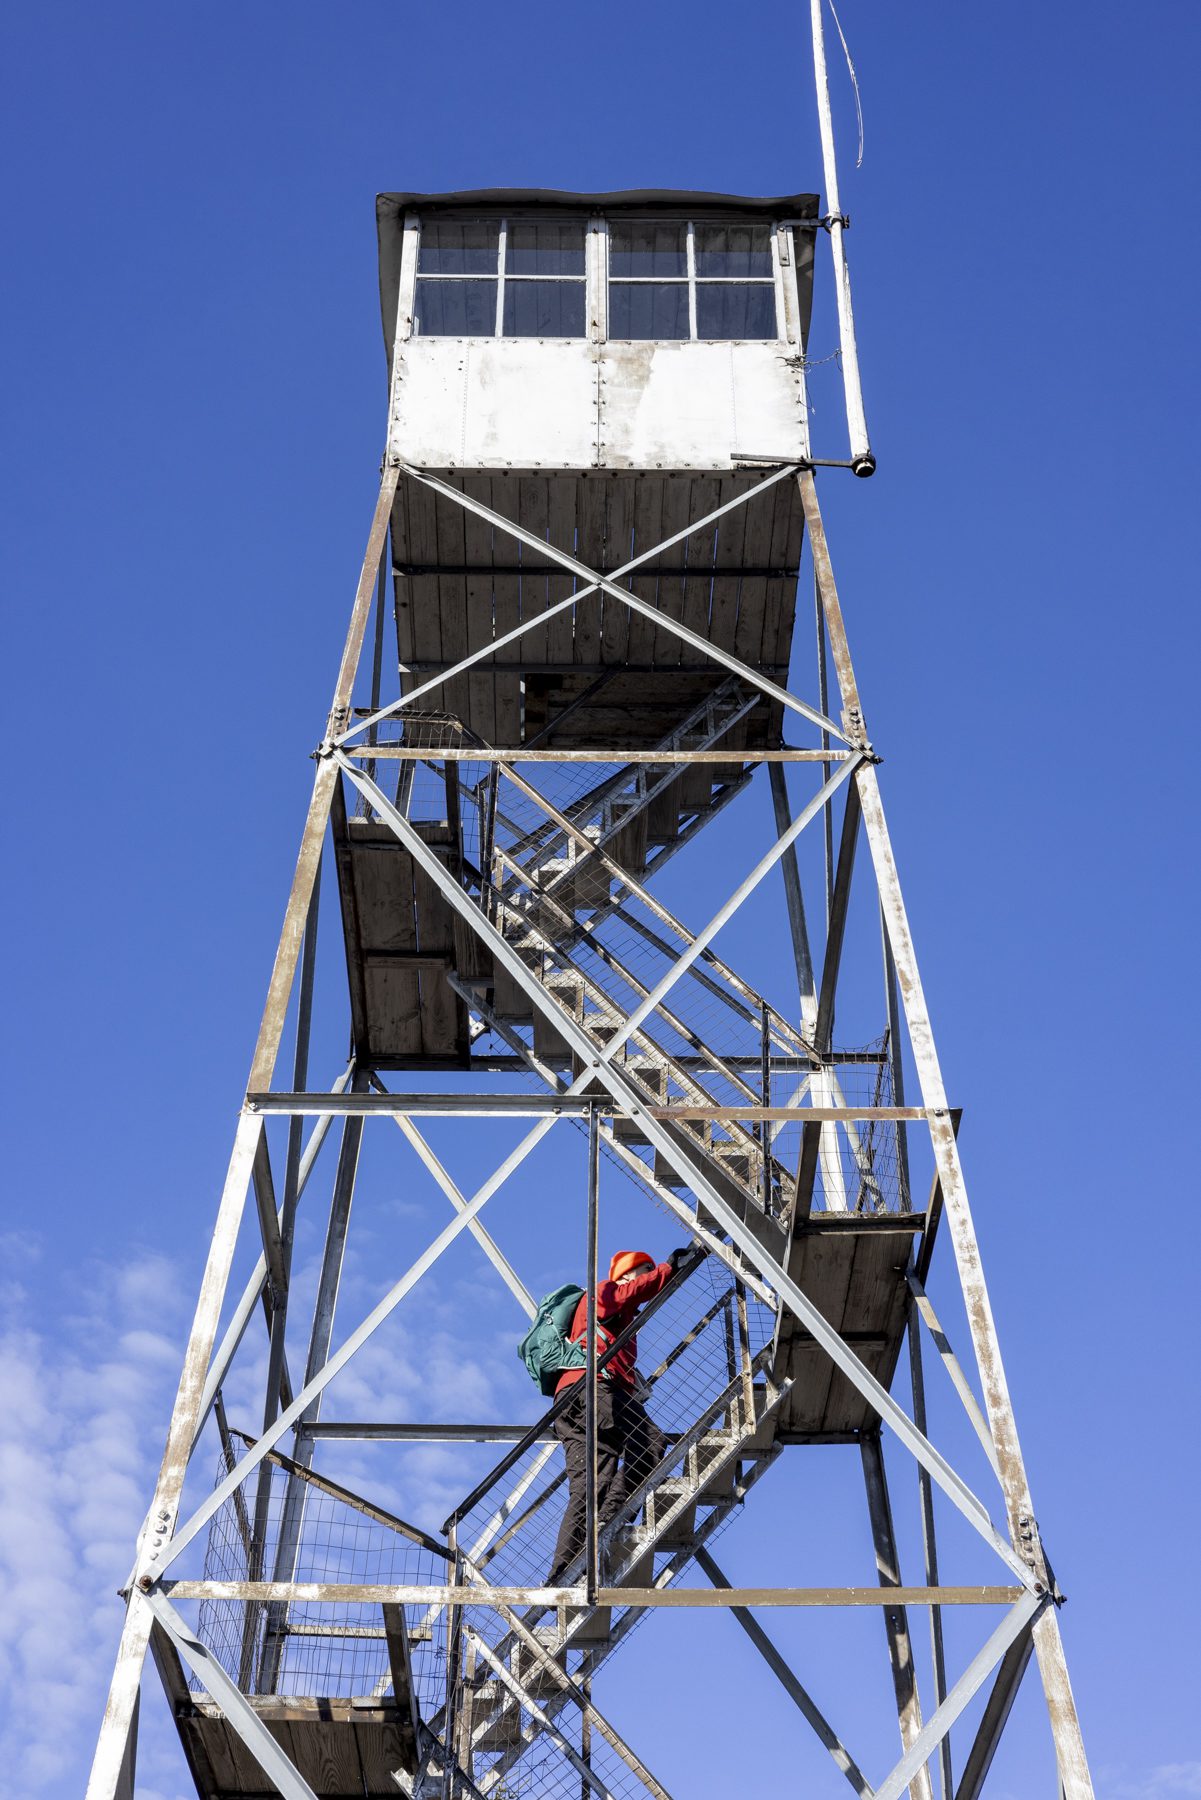 The Poke-O-Moonshine fire tower offers views in all directions, including to the north where one can see Plattsburgh and to Montreal on a clear day. The cab is only open during the warming hiking season.  Photo by Mike Lynch